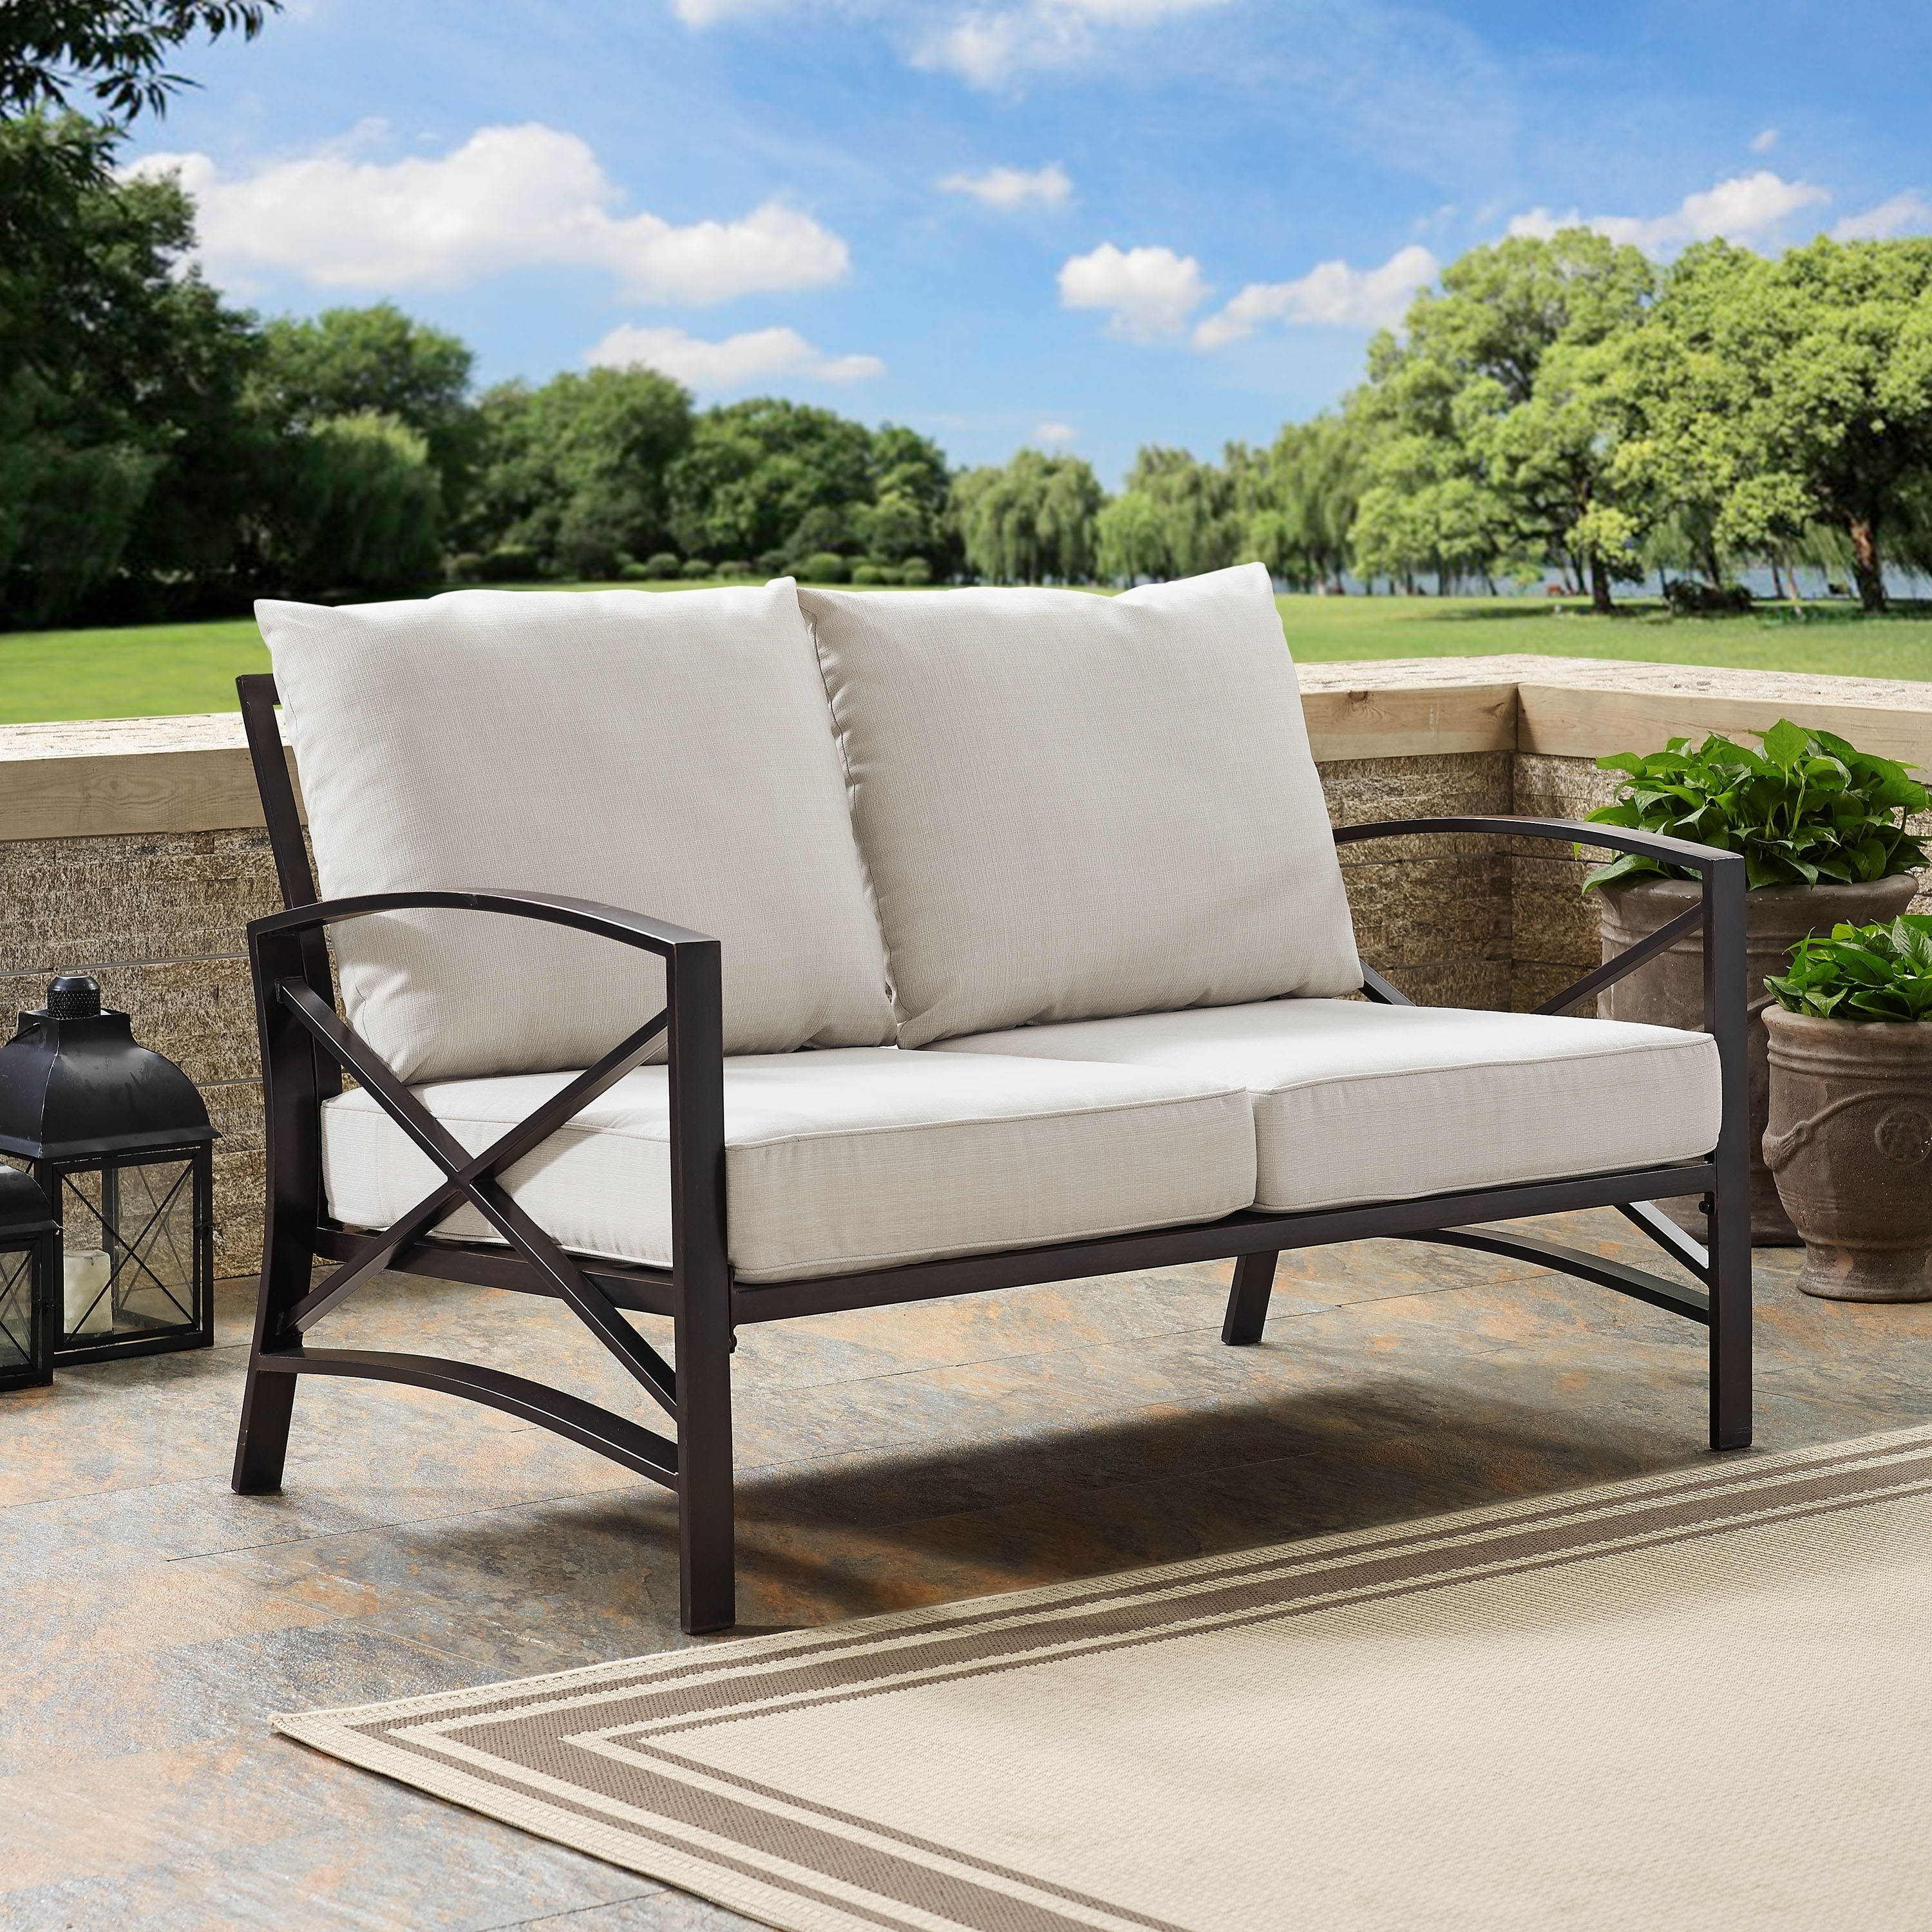 Kaplan Oiled Bronze Steel Outdoor Loveseat With Oatmeal Cushions - 54 W X 30.5 D X 32 H